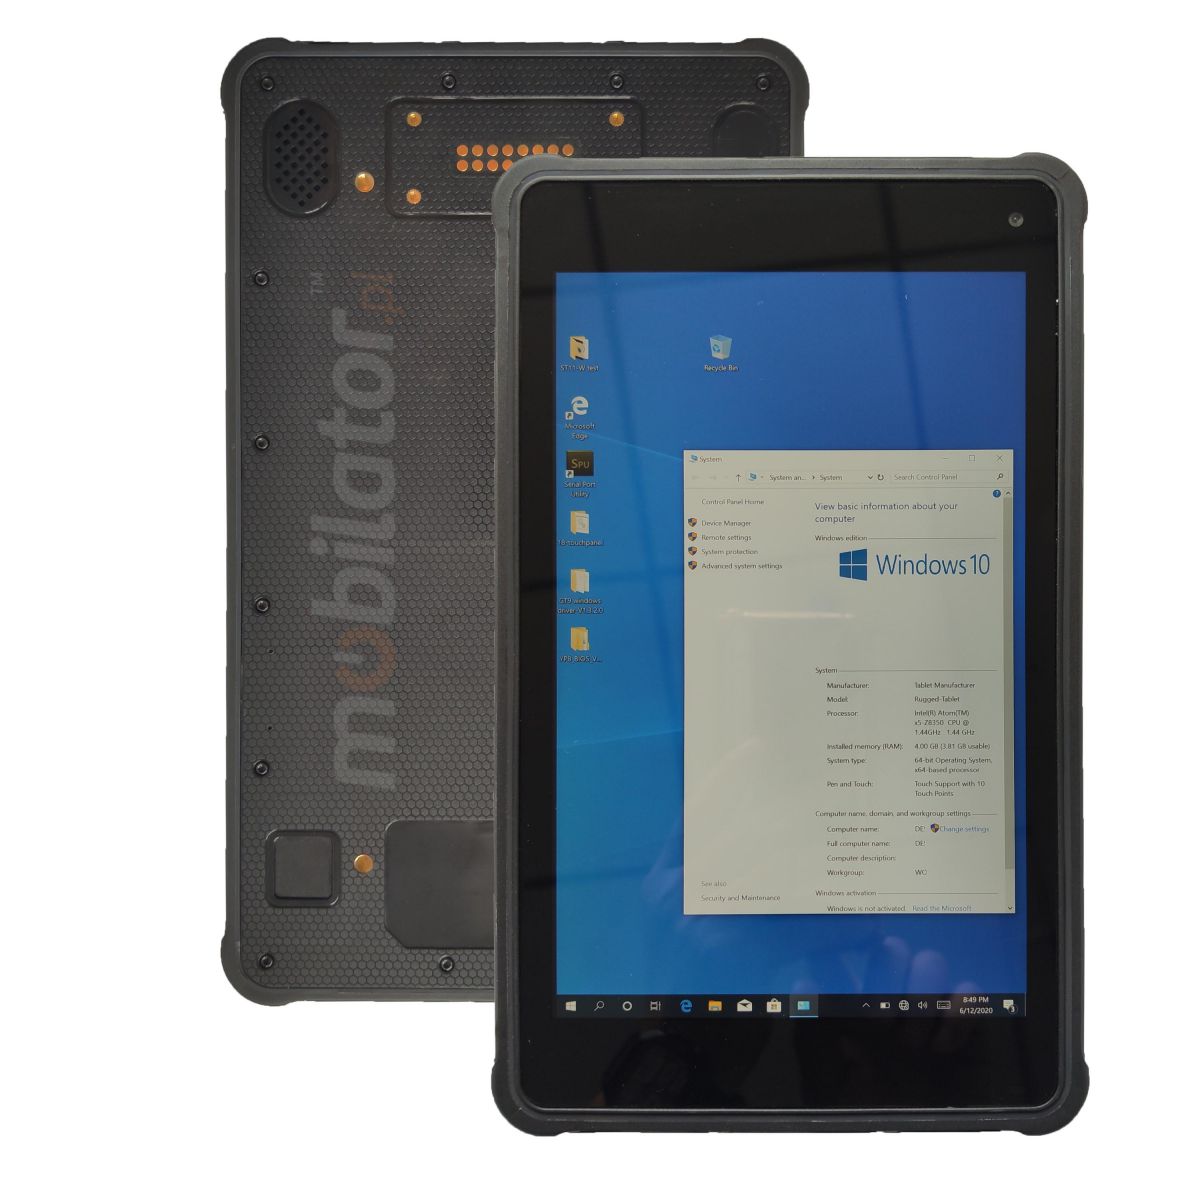 Industrial tablet with Honeywell N3680 2D code scanner, front NFC, 4G and Bluetooth 4.0, 4GB RAM and 64GB ROM- MobiPad ST800B v.8 